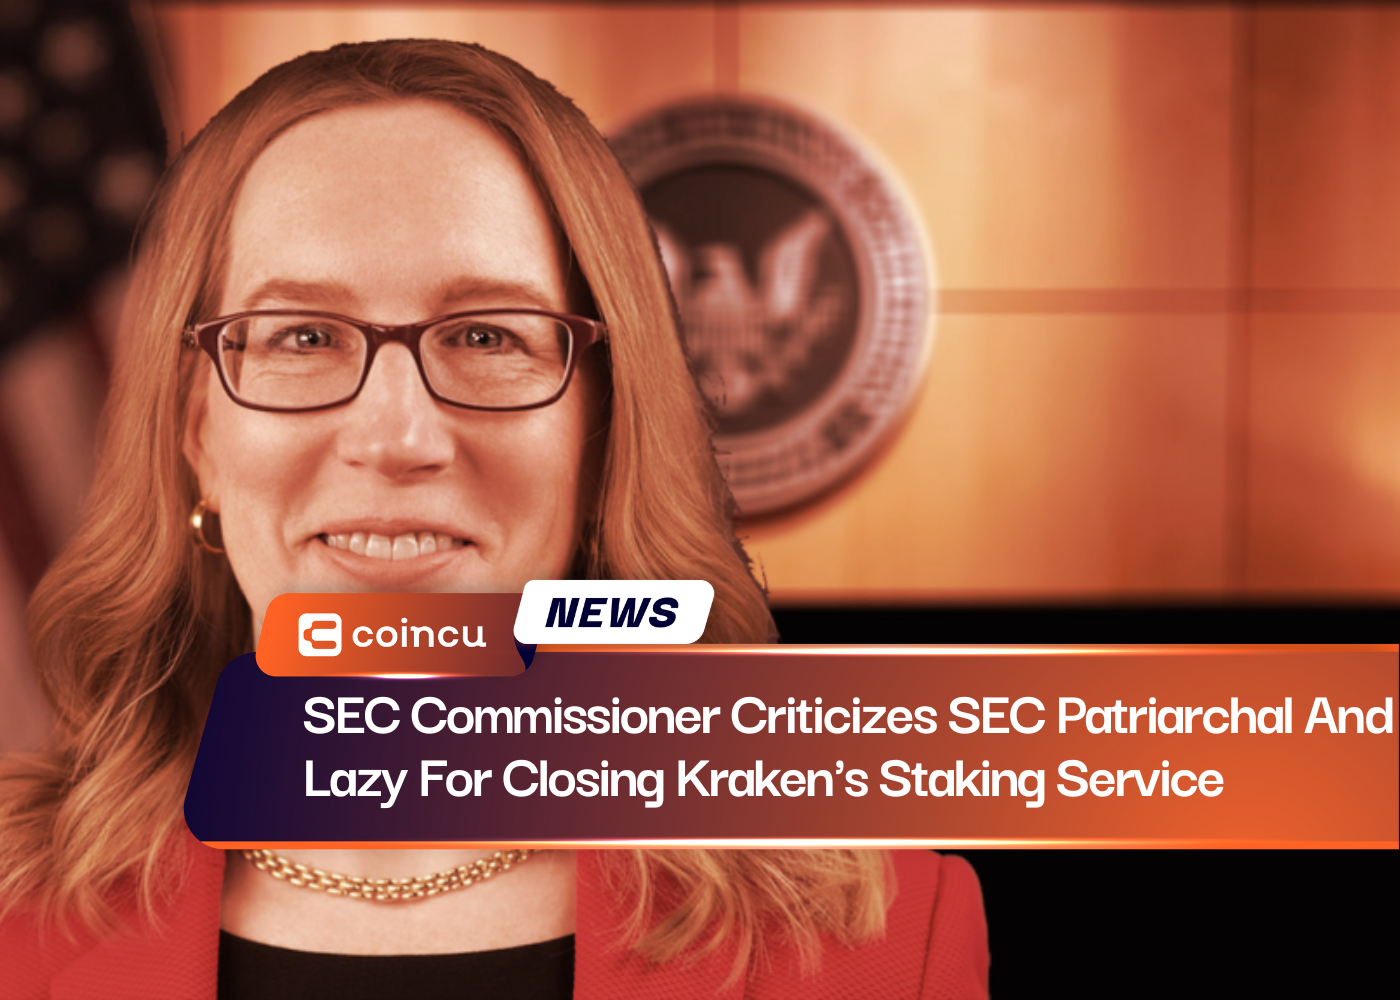 SEC Commissioner Criticizes SEC Patriarchal And Lazy For Closing Kraken's Staking Service